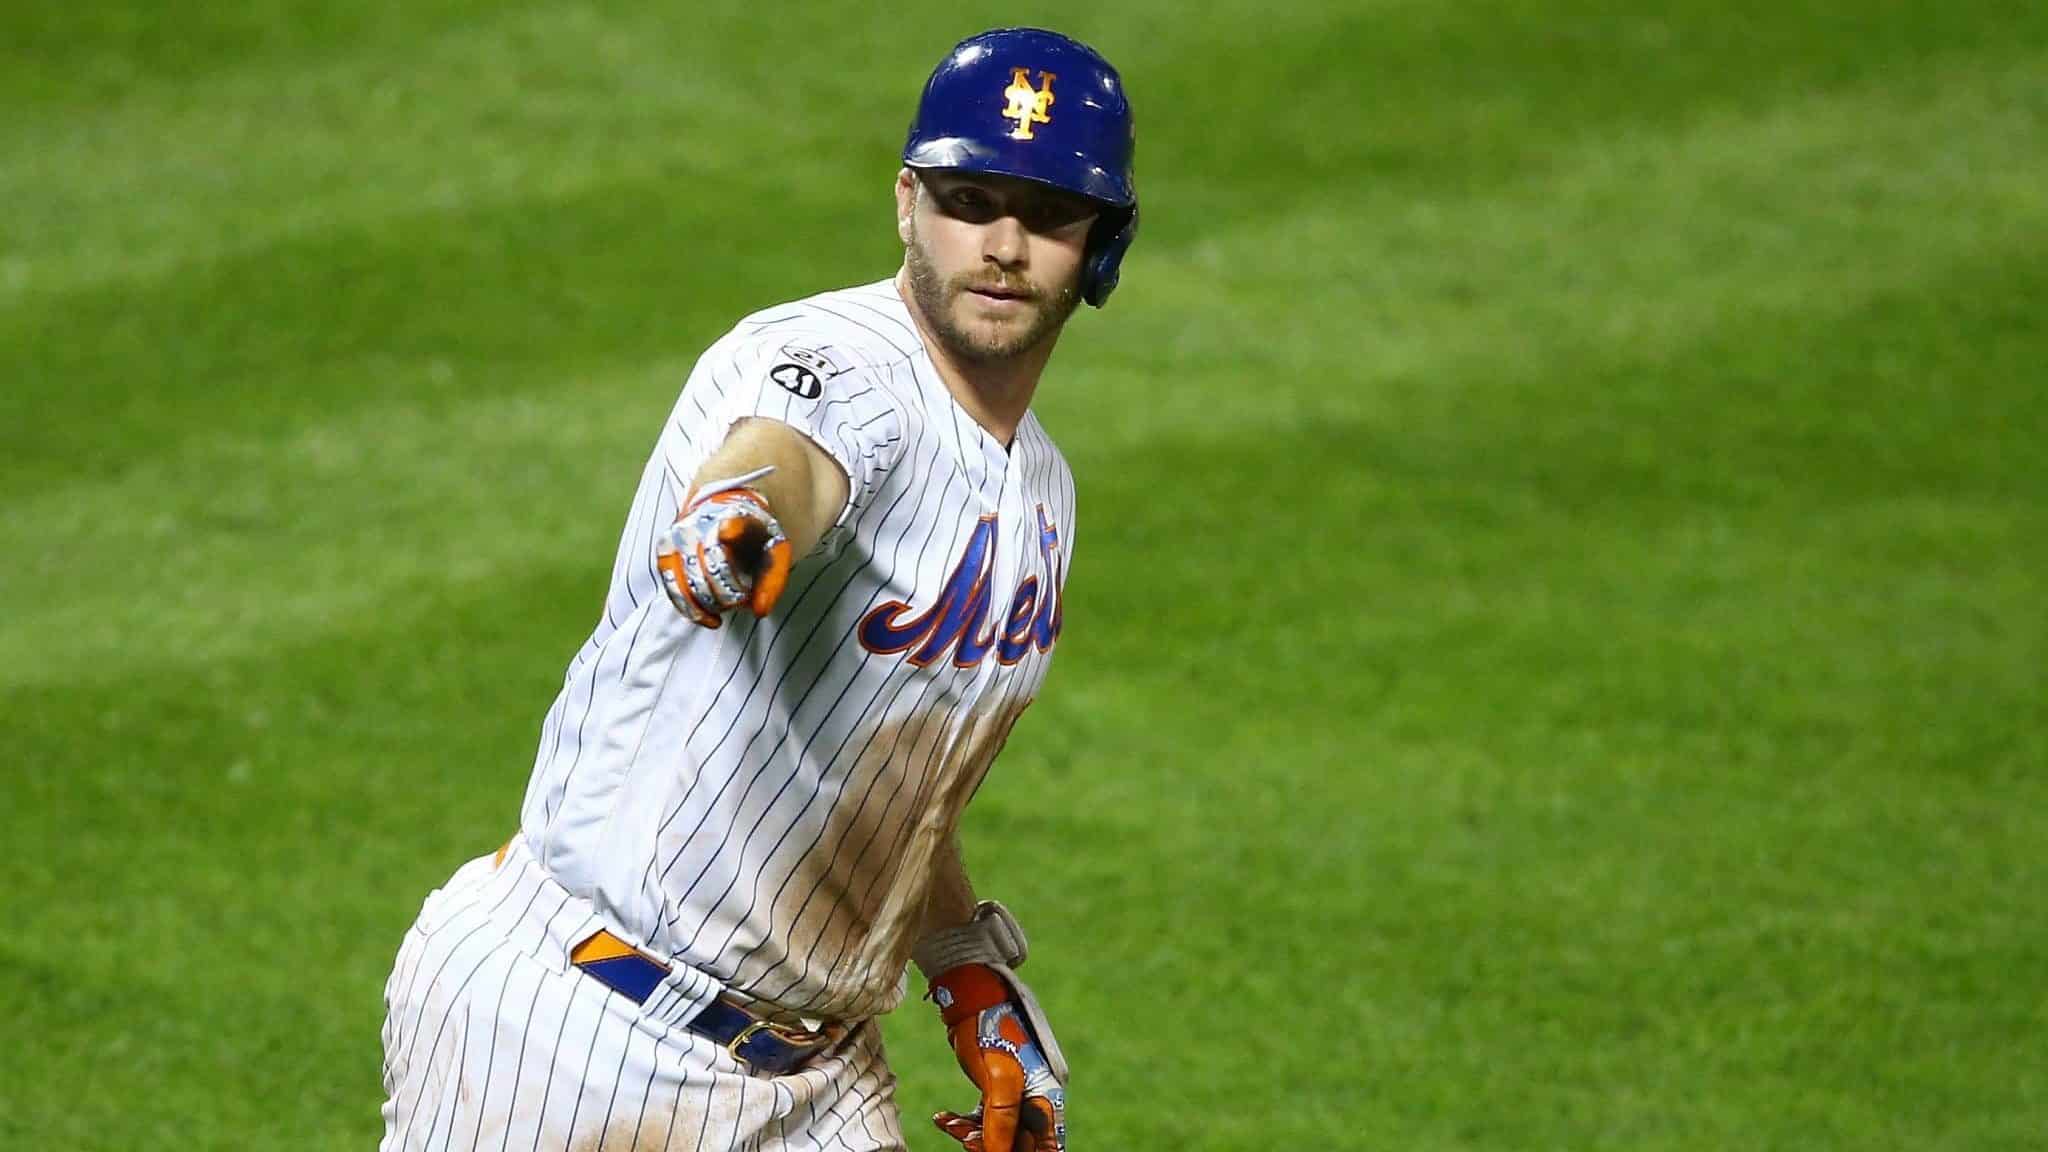 NEW YORK, NEW YORK - SEPTEMBER 09: Pete Alonso #20 of the New York Mets points to the bench after hitting a home run in the eighth inning against the Baltimore Orioles at Citi Field on September 09, 2020 in New York City.